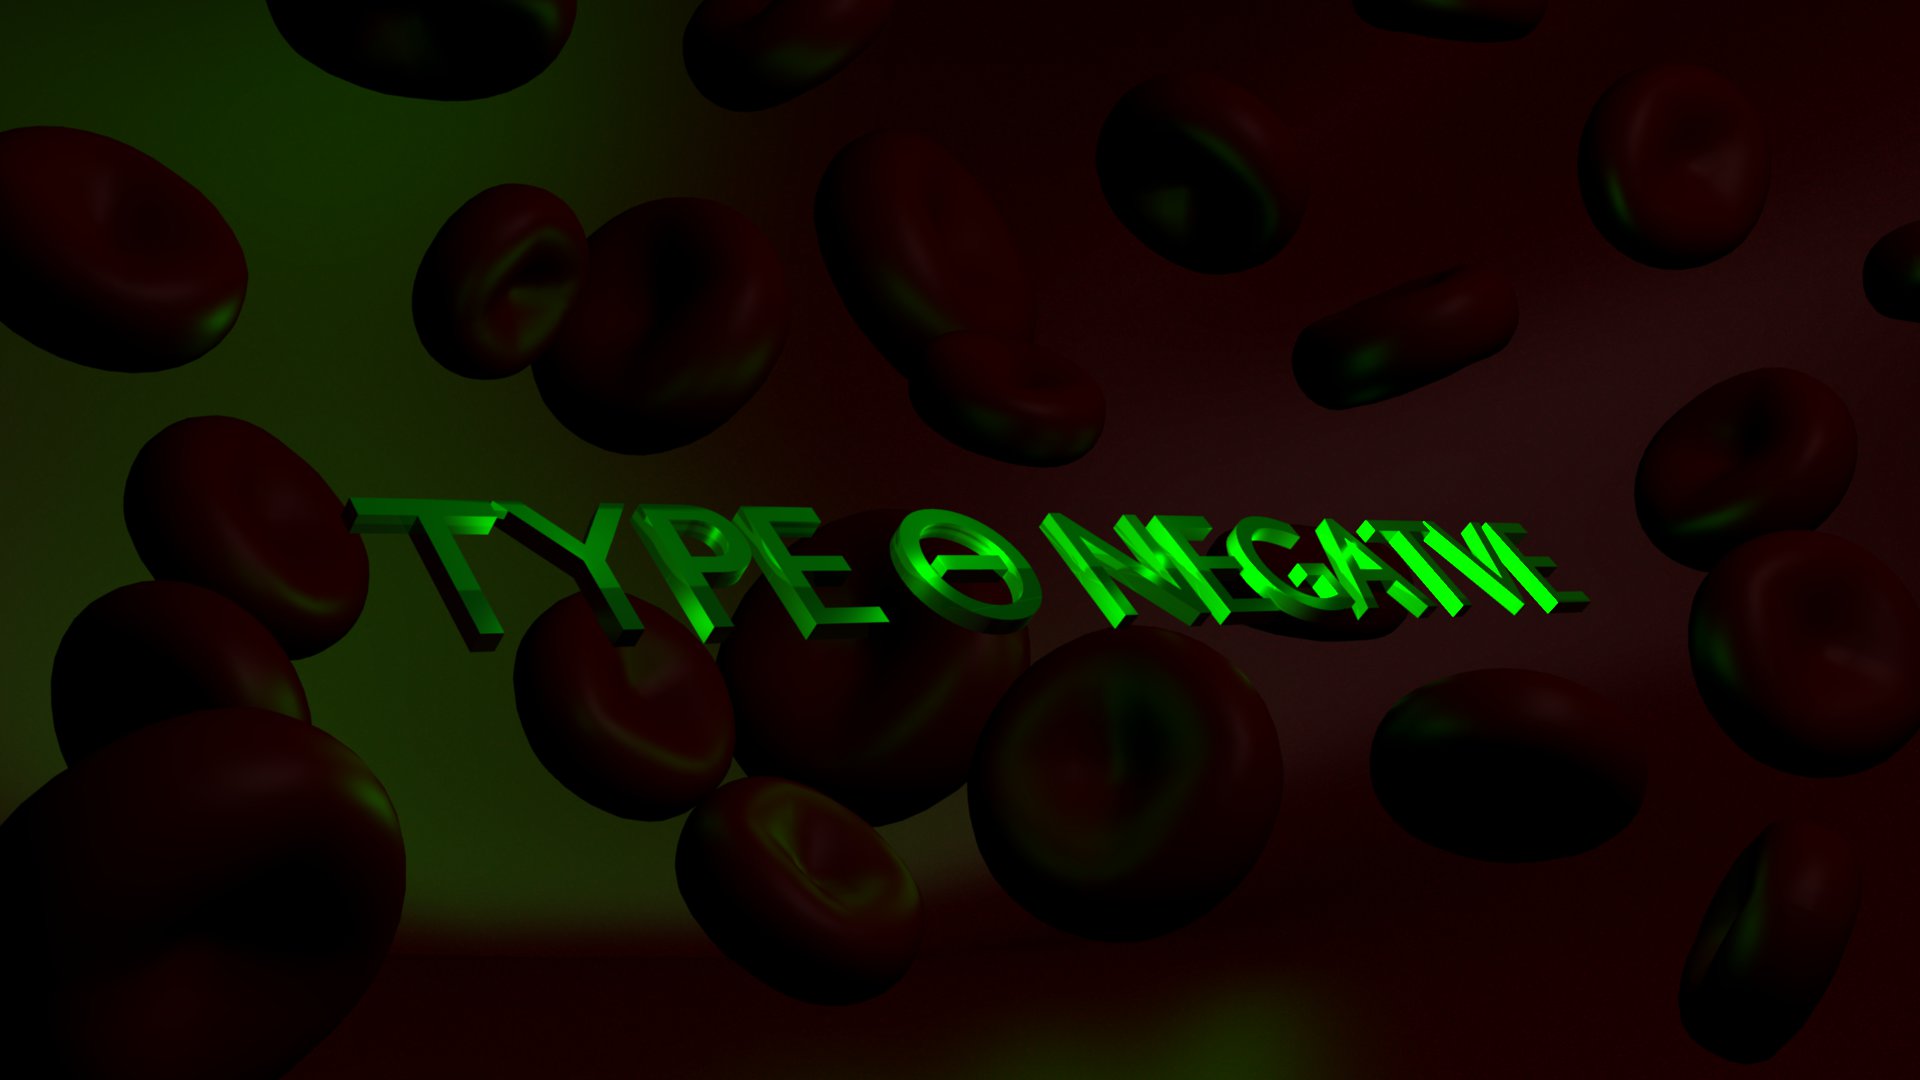 Type O Negative Wallpaper By Carlosed